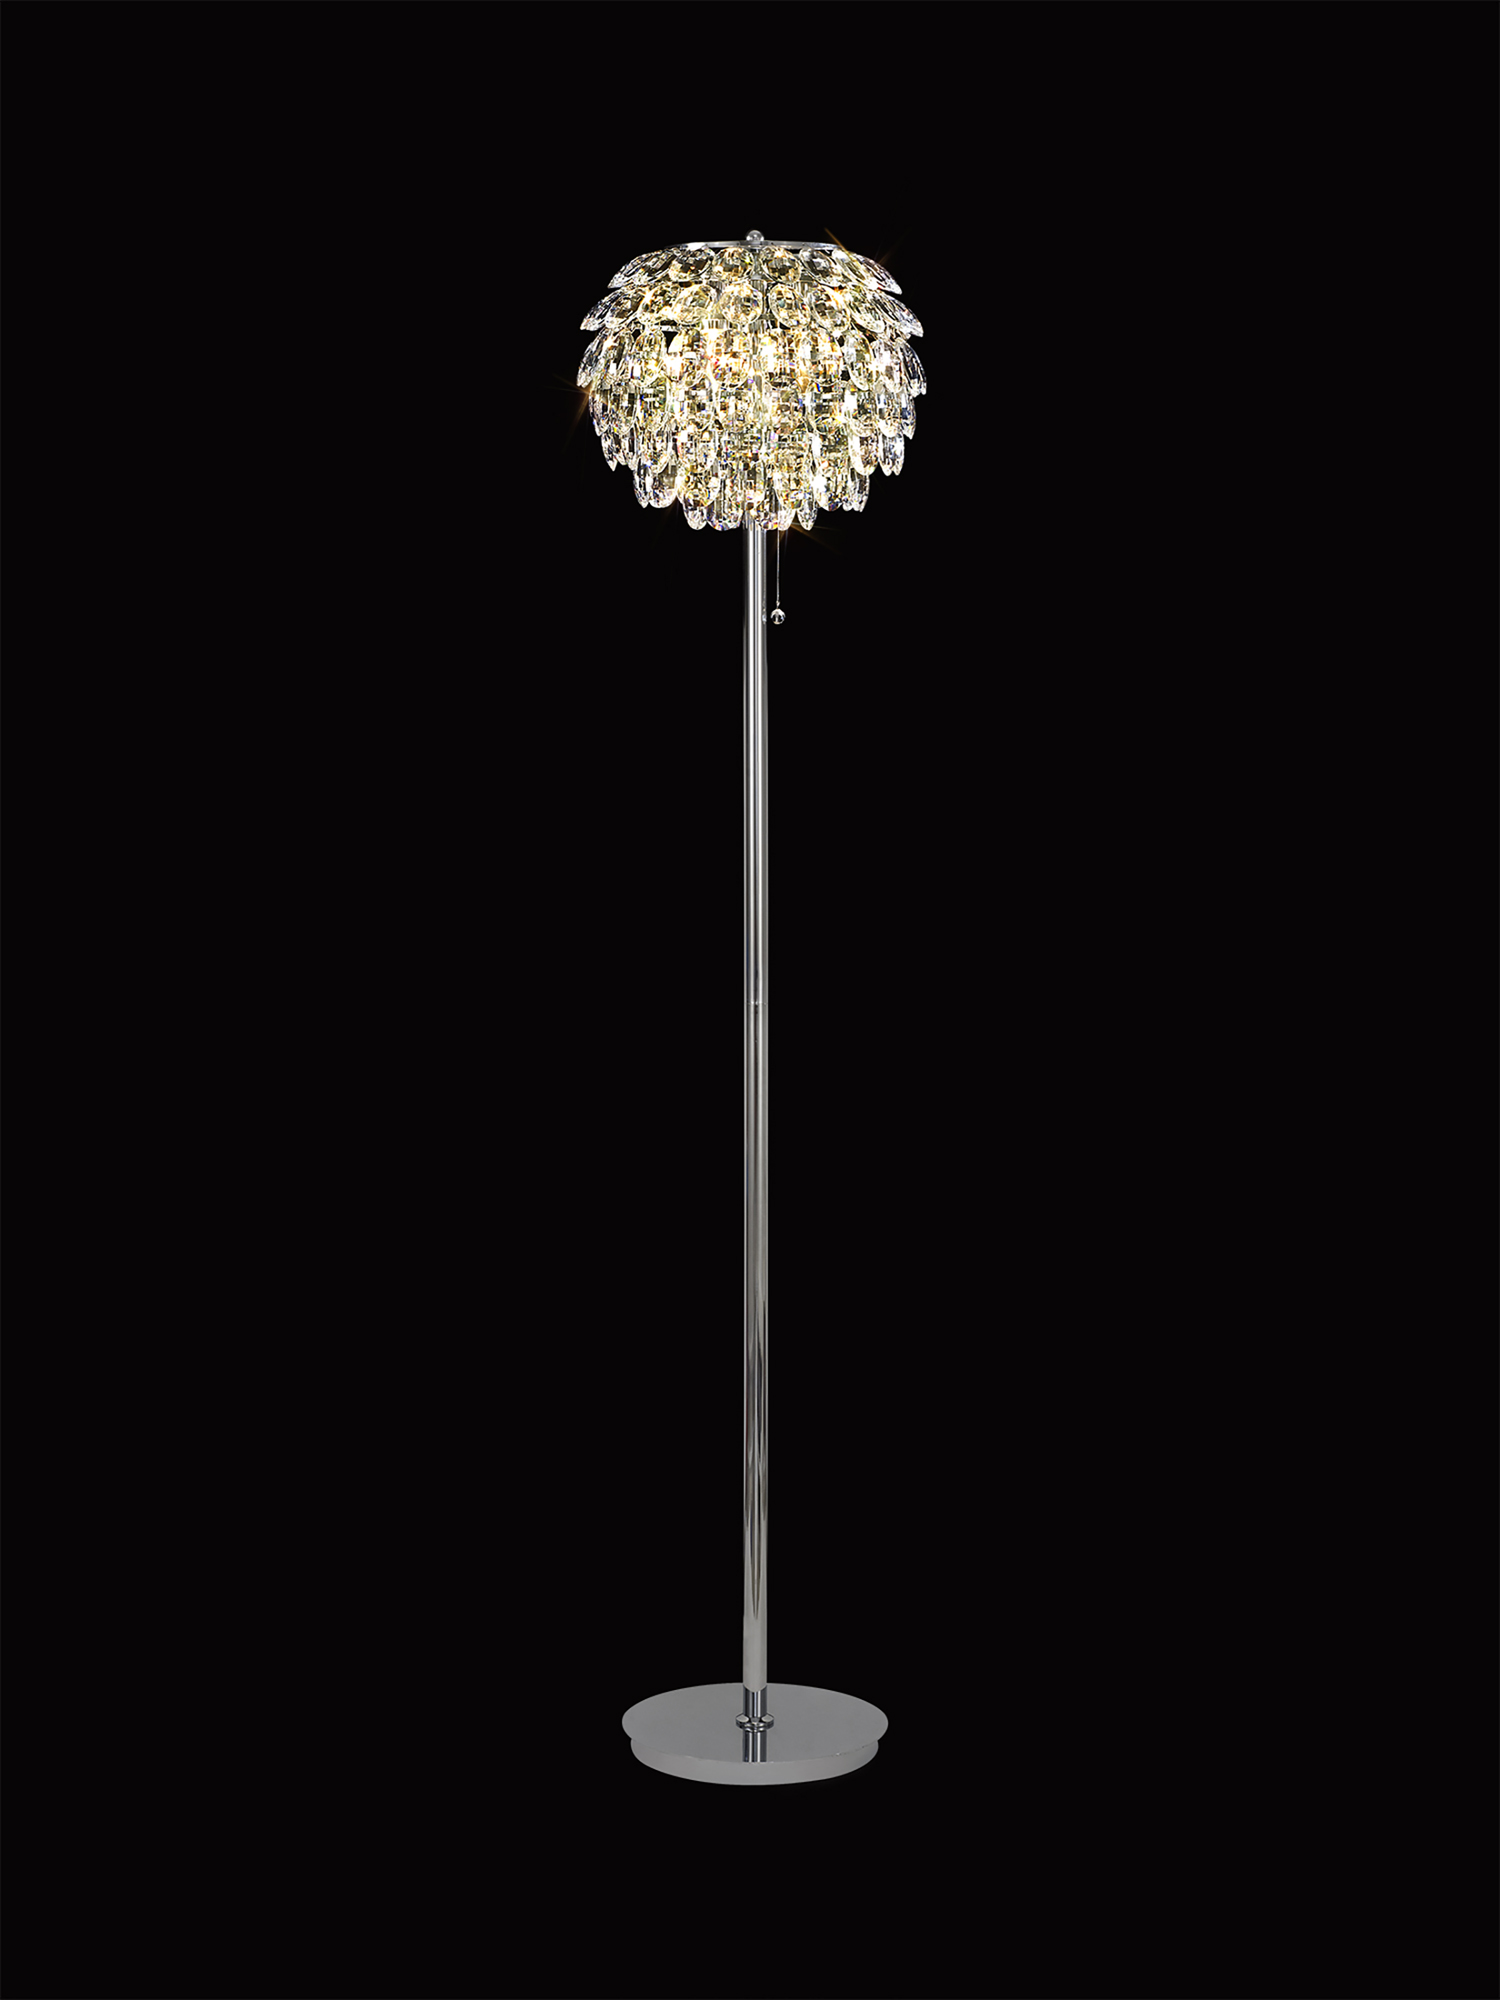 Coniston Polished Chrome Crystal Floor Lamps Diyas Contemporary Crystal Floor Lamps